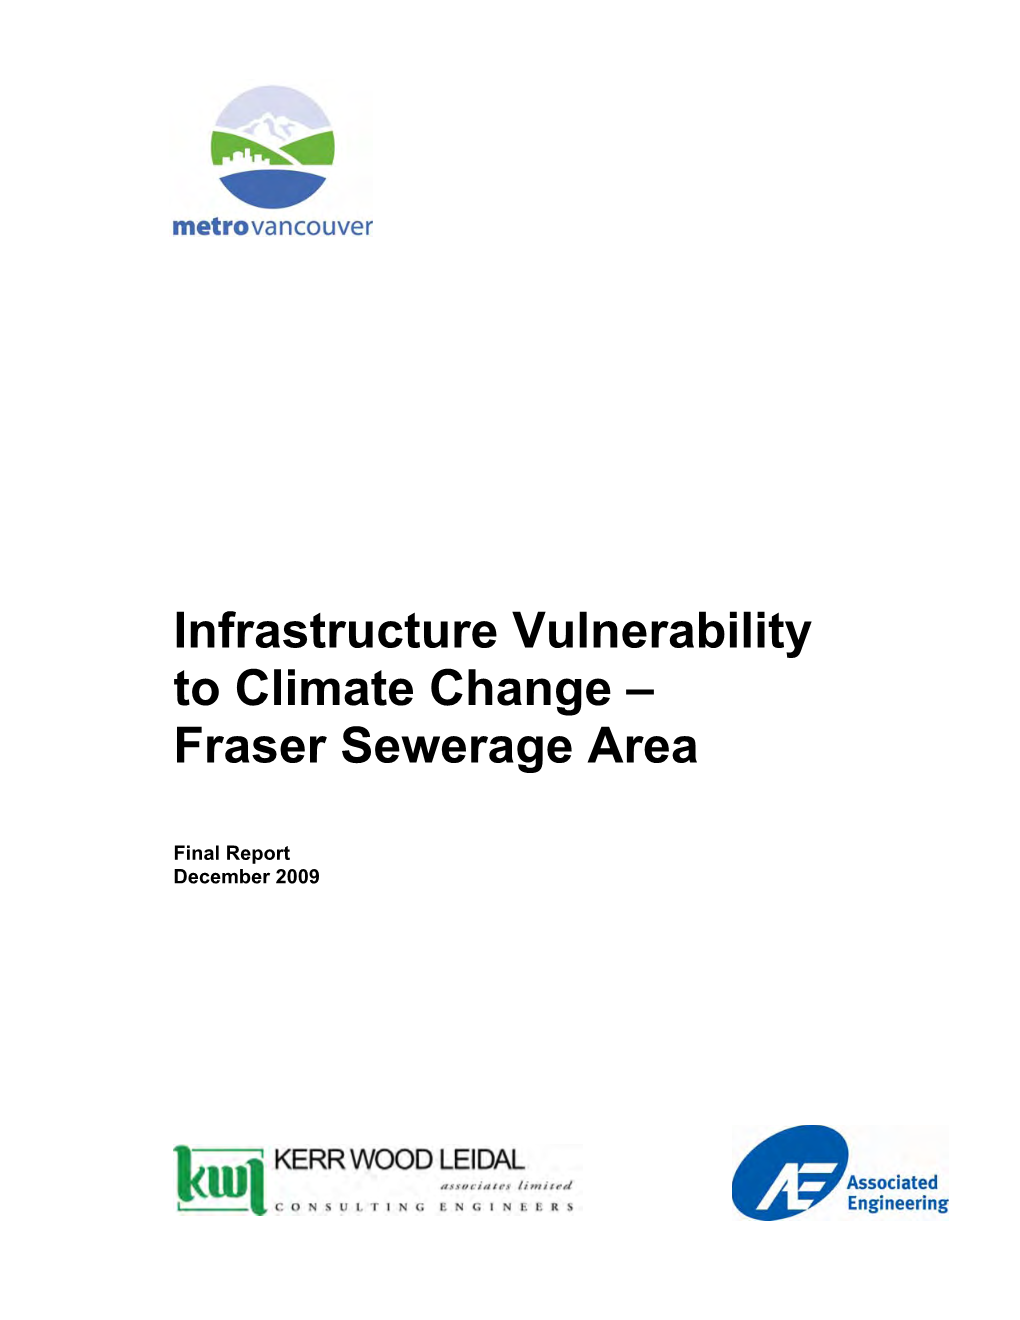 Metro Vancouver Fraser Sewerage Area Infrastructure